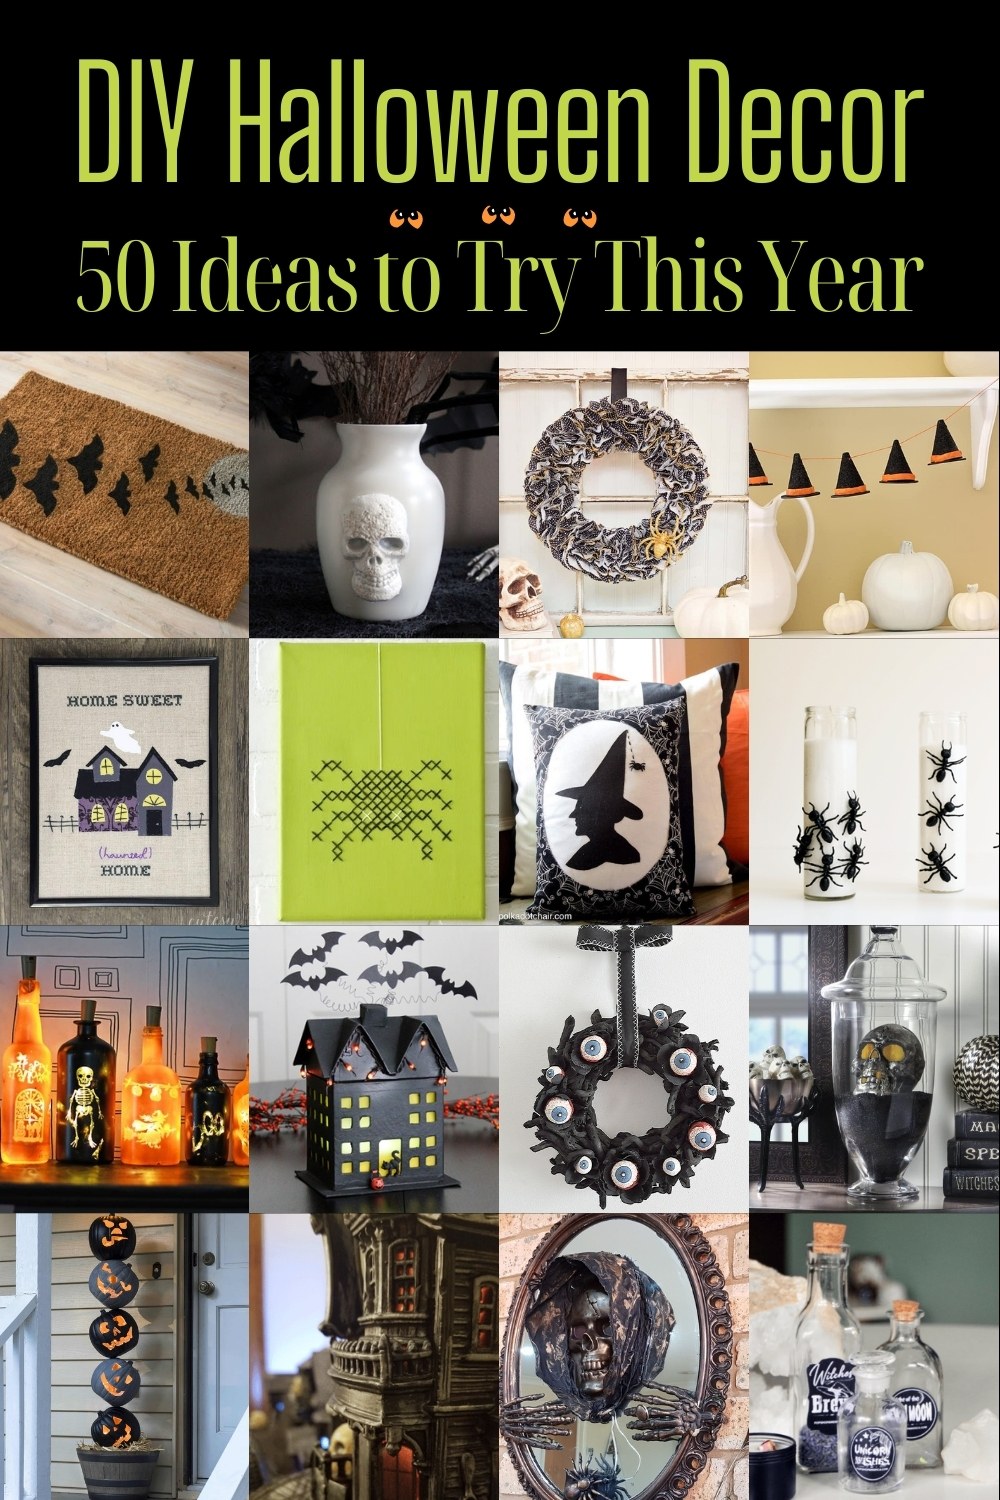 Booin' on a Budget:: DIY Witch's Apothecary Halloween Decor